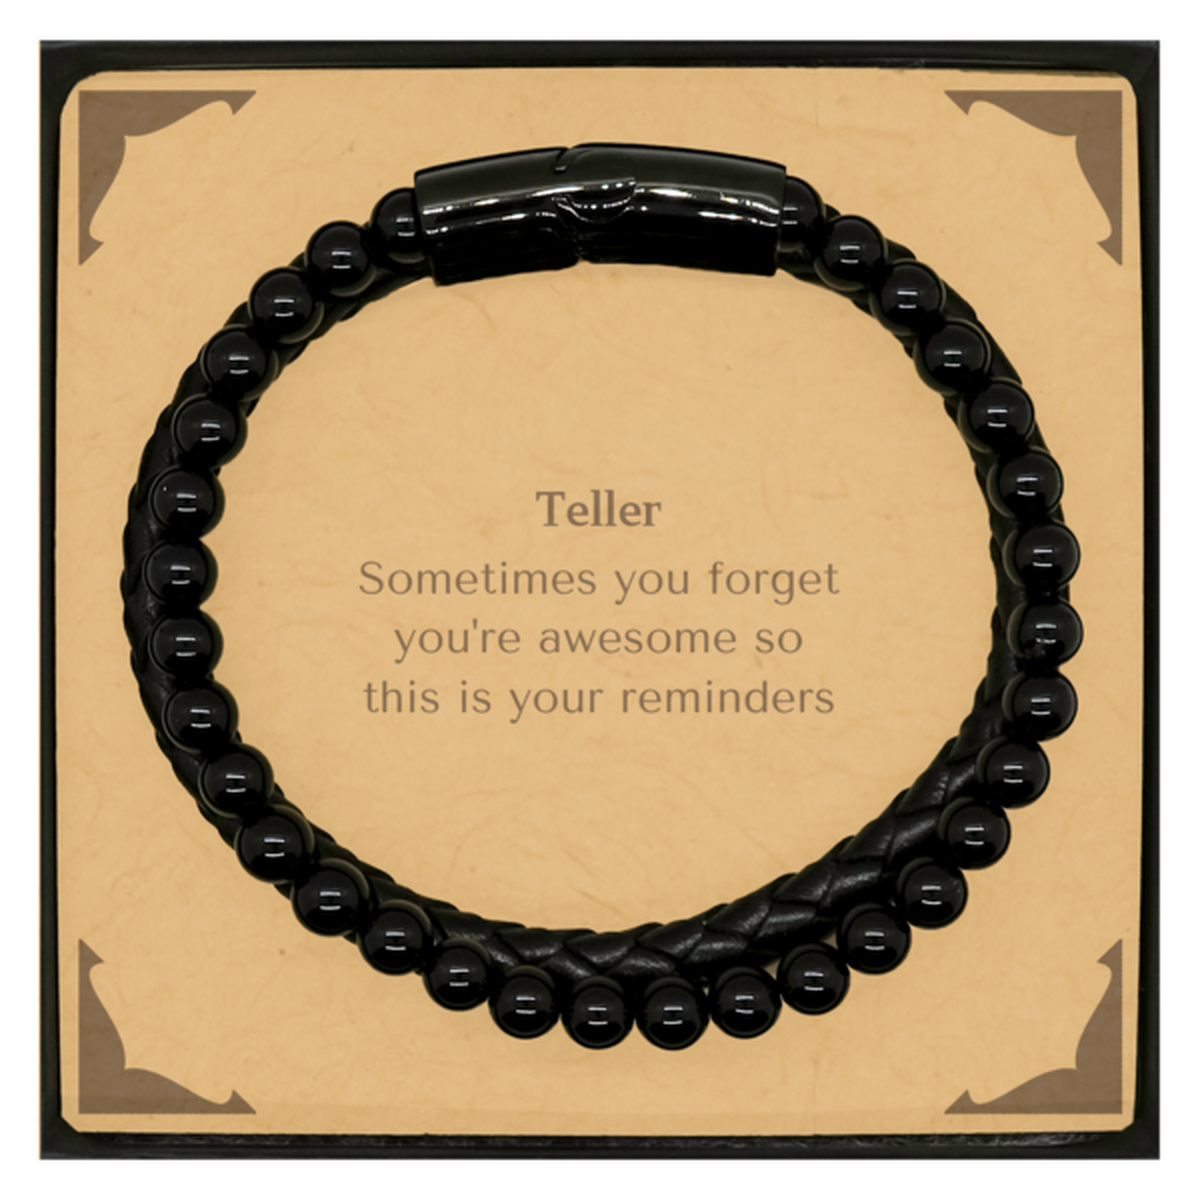 Sentimental Teller Stone Leather Bracelets, Teller Sometimes you forget you're awesome so this is your reminders, Graduation Christmas Birthday Gifts for Teller, Men, Women, Coworkers